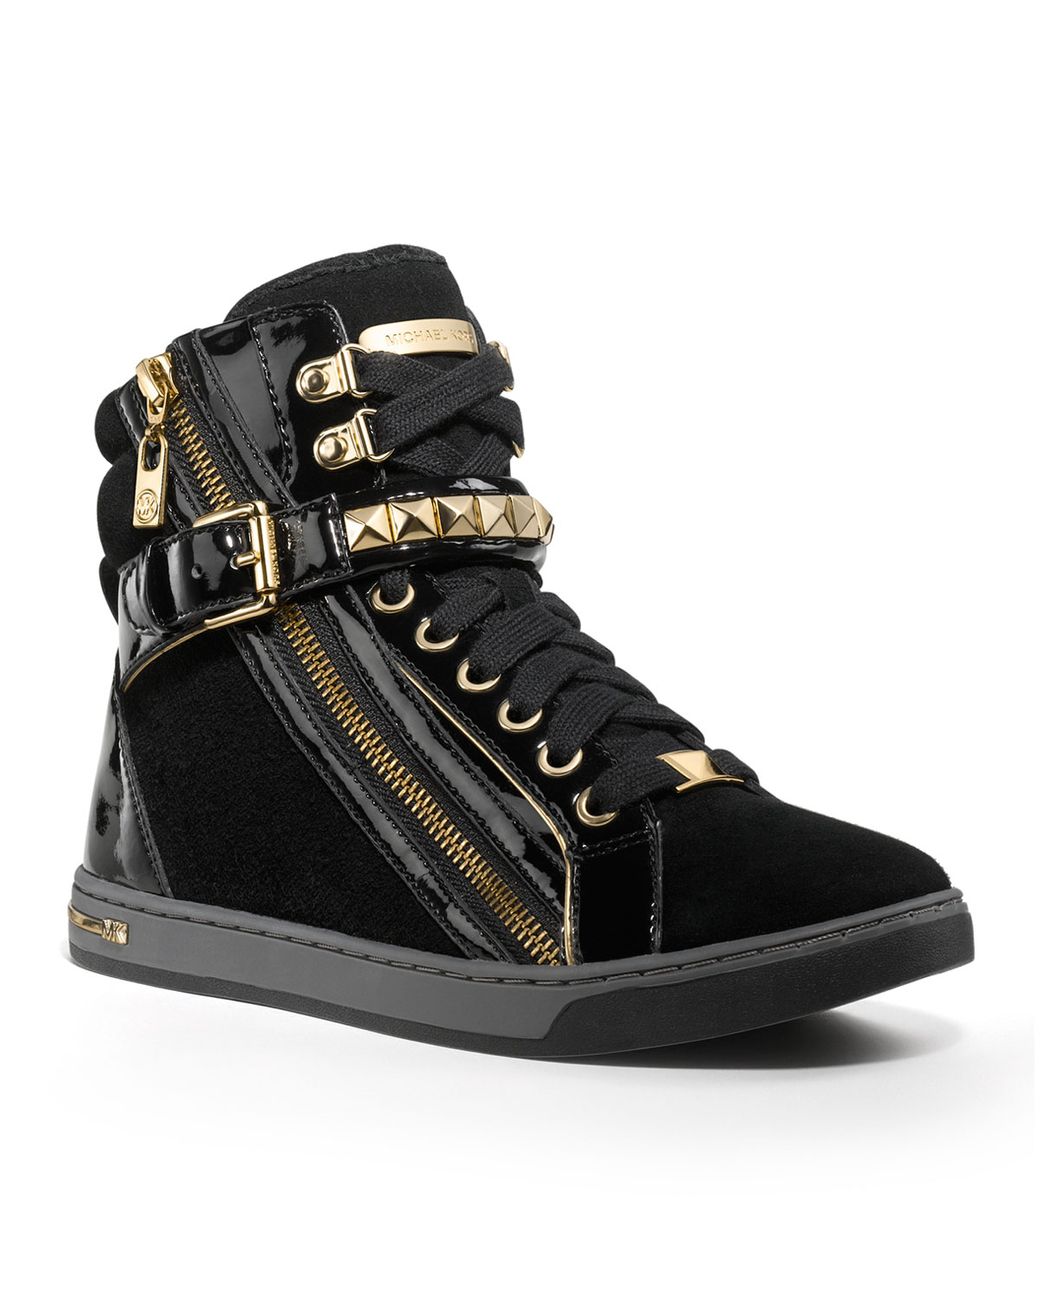 Michael Kors Glam Studded High Top in Black | Lyst